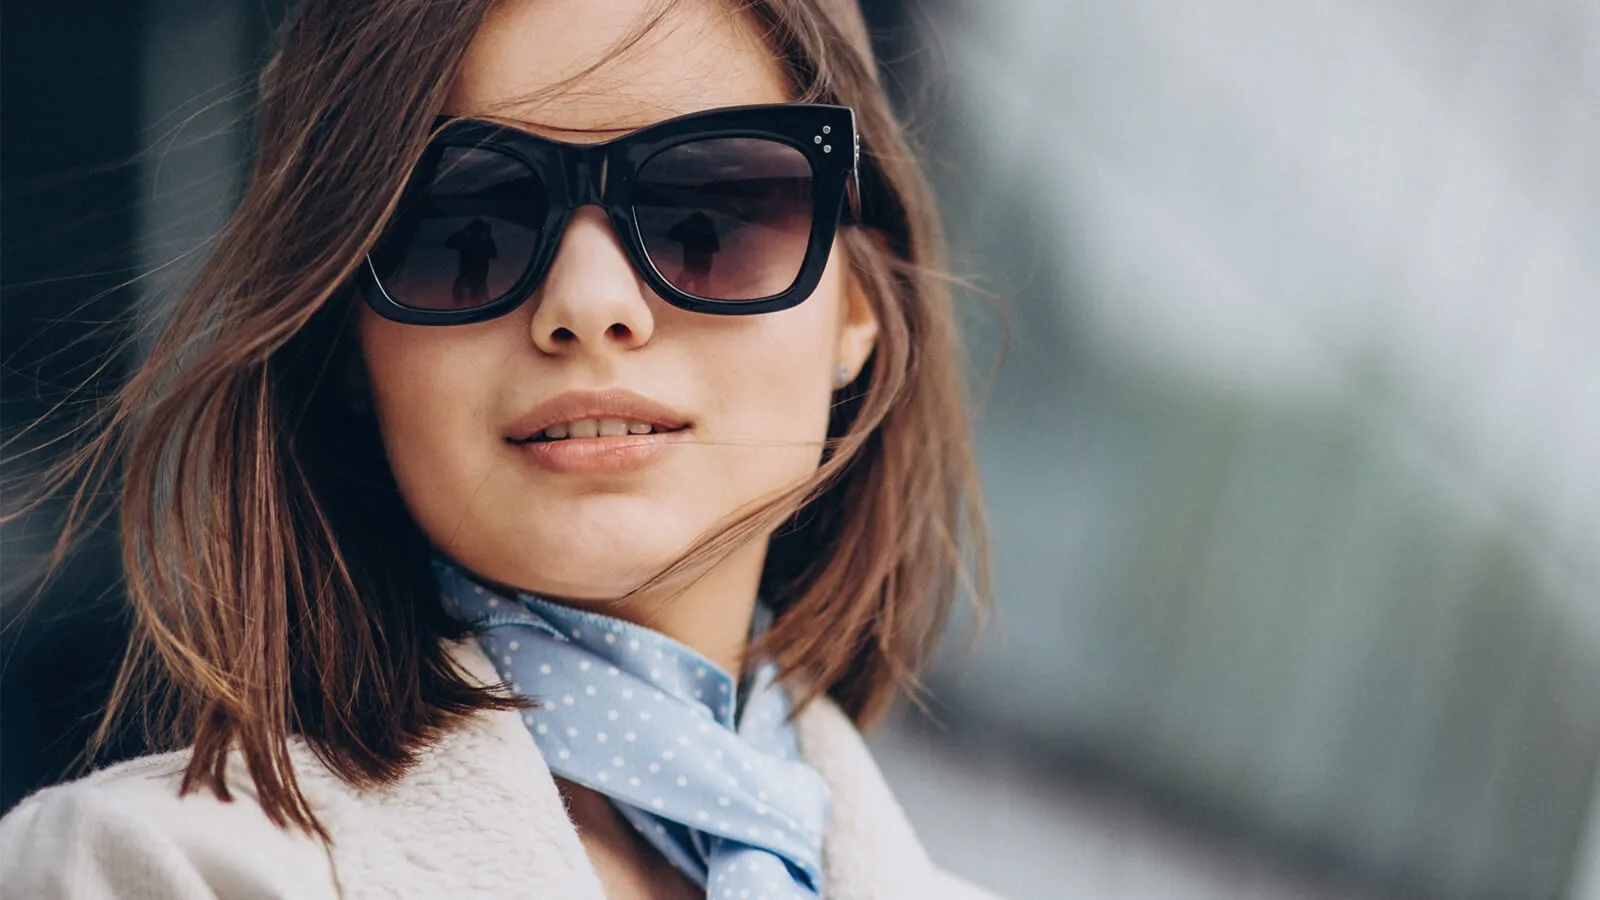 The best black sunglasses you’ll want to own this summer